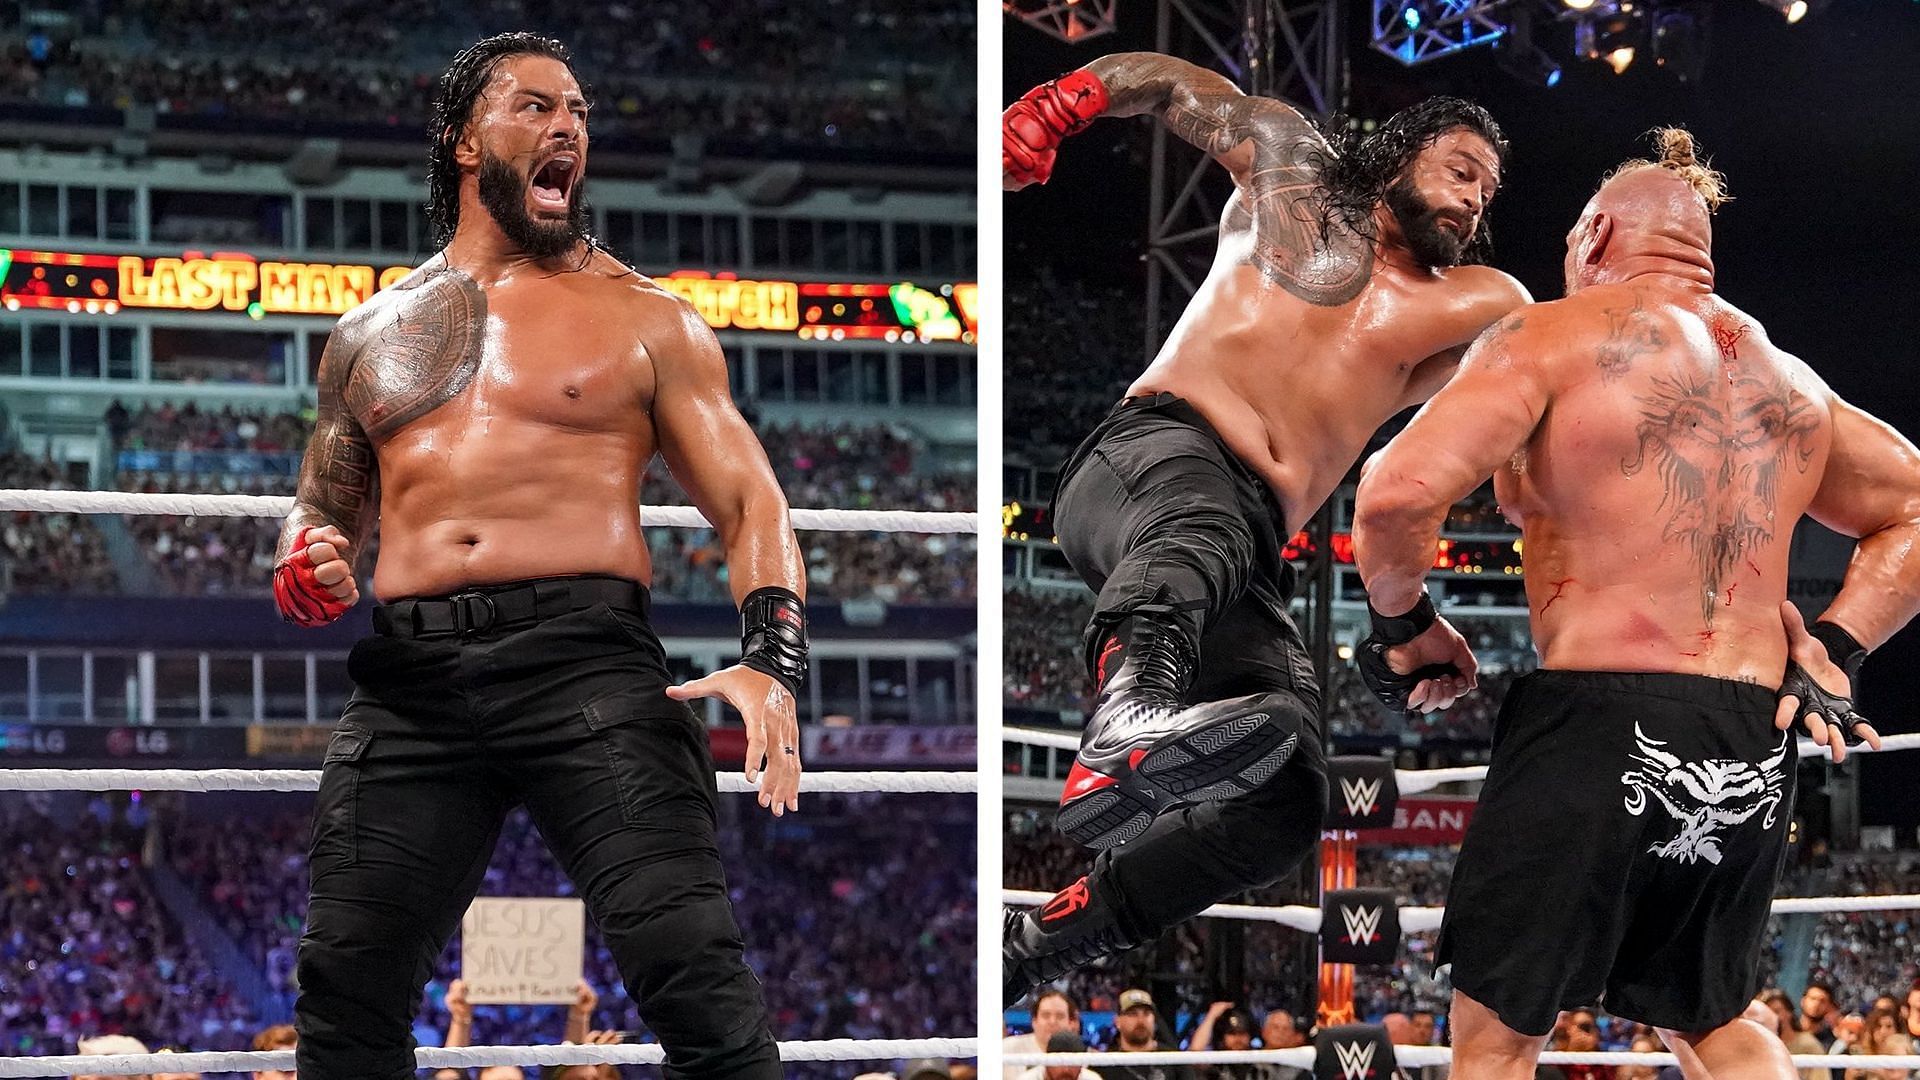 Roman Reigns and other WWE Superstars are part timers